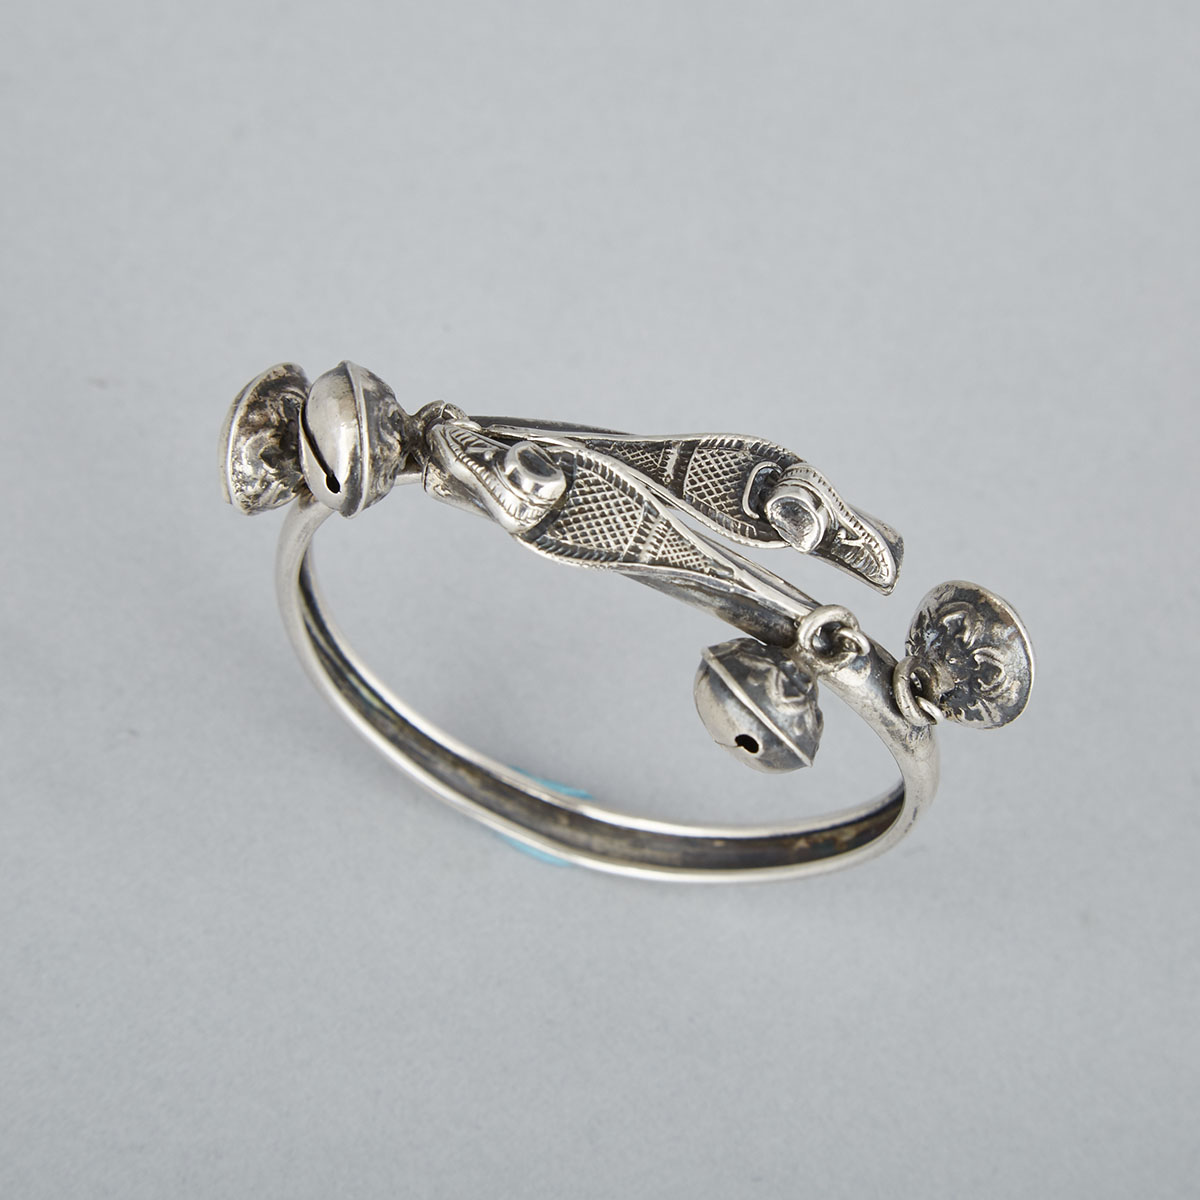 Canadian Silver Snowshoe Bangle, early 20th century